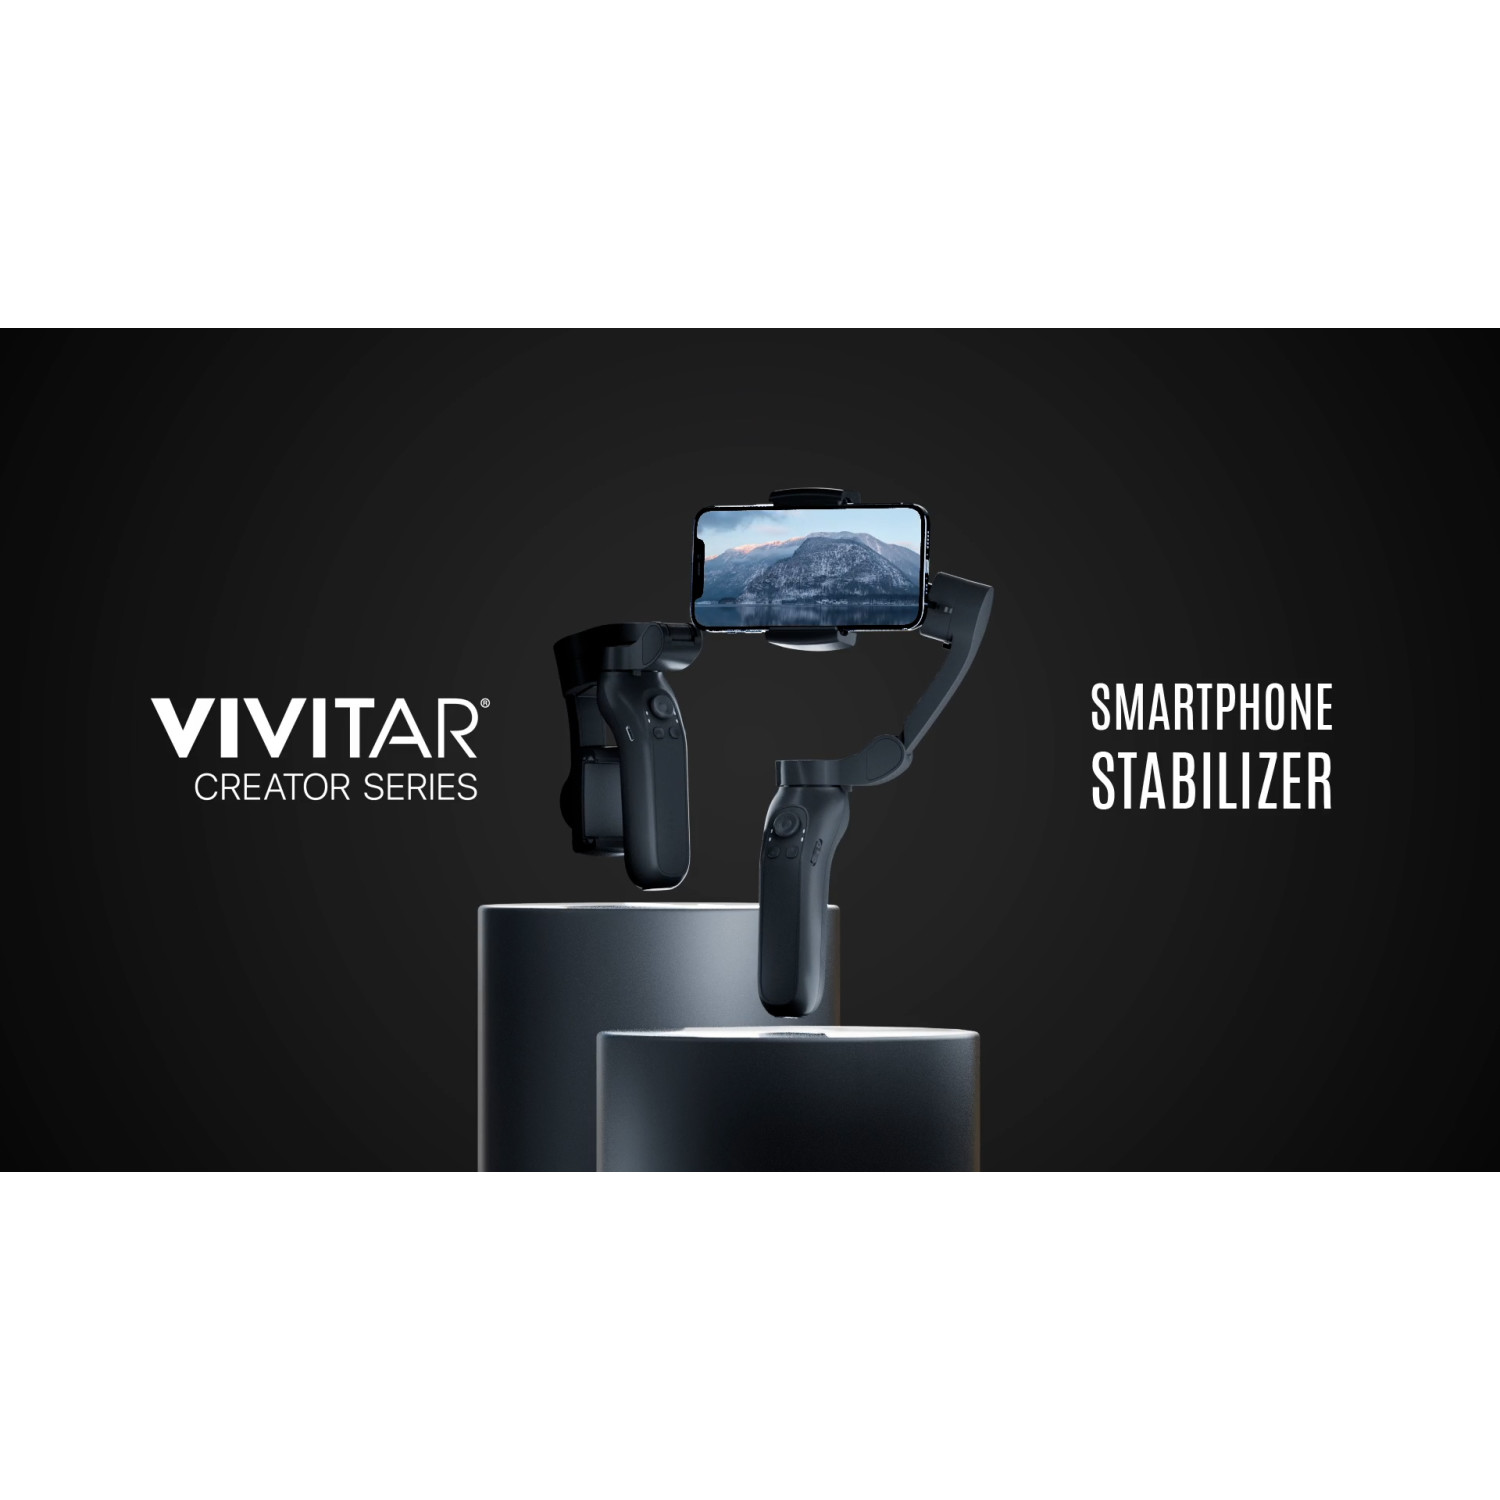 Vivitar Smartphone Stabilizer, 3-Axis Foldable Pocket Gimbal, Stable Perfect Selfies, Smooth Video, Compatible with iPhone and Android - image 5 of 15